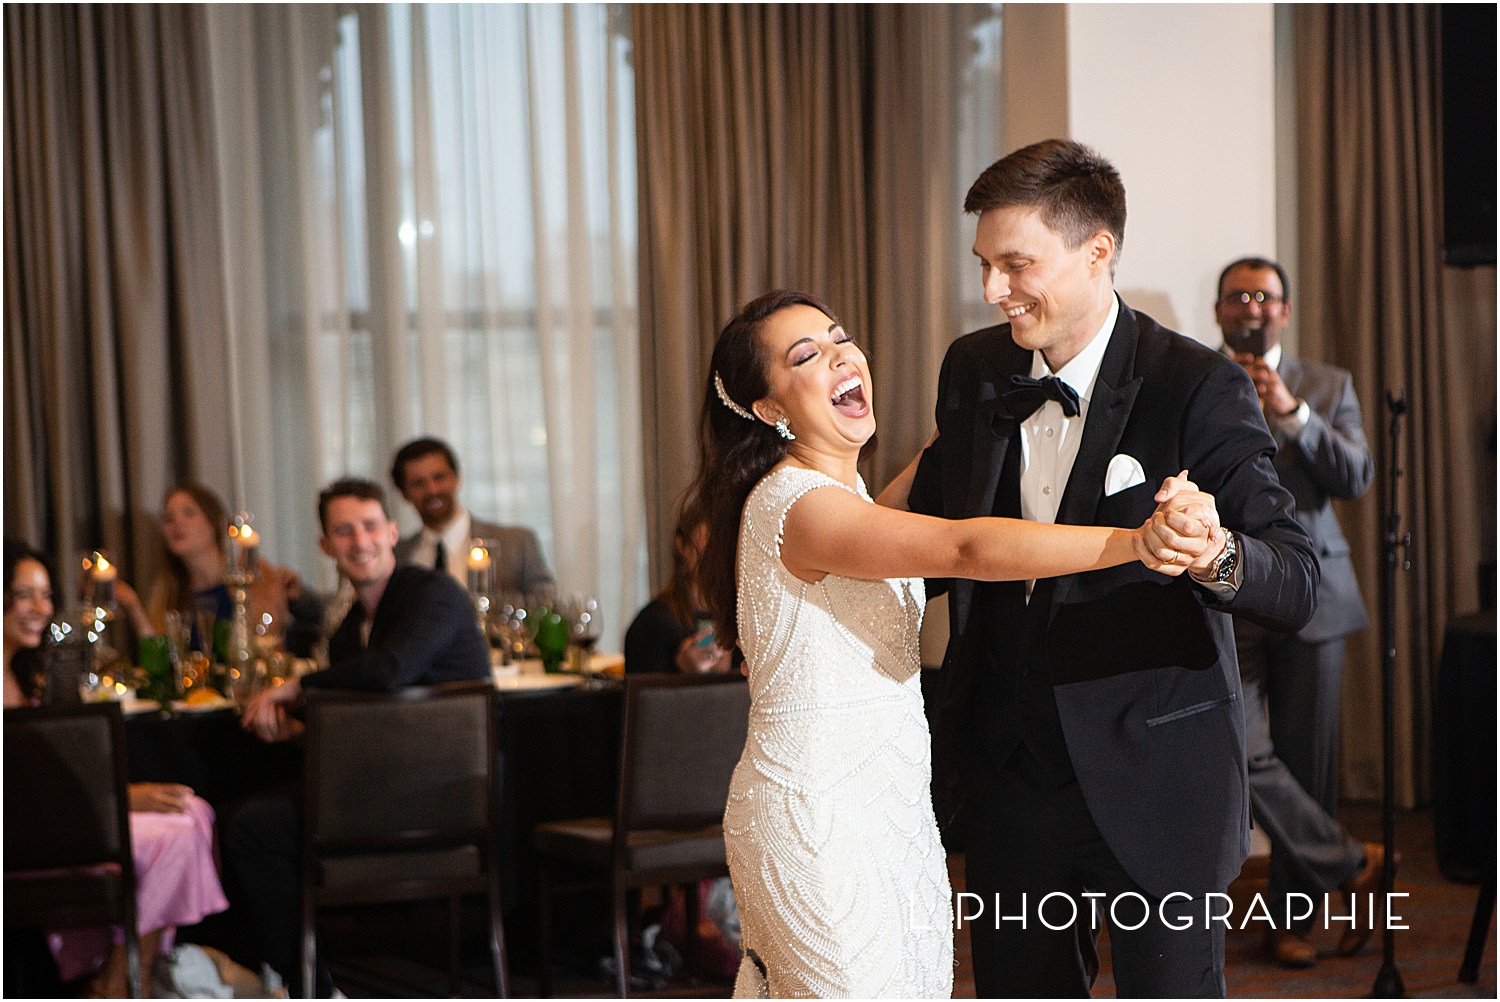 L Photographie St. Louis wedding photography The Last Hotel_0047.jpg